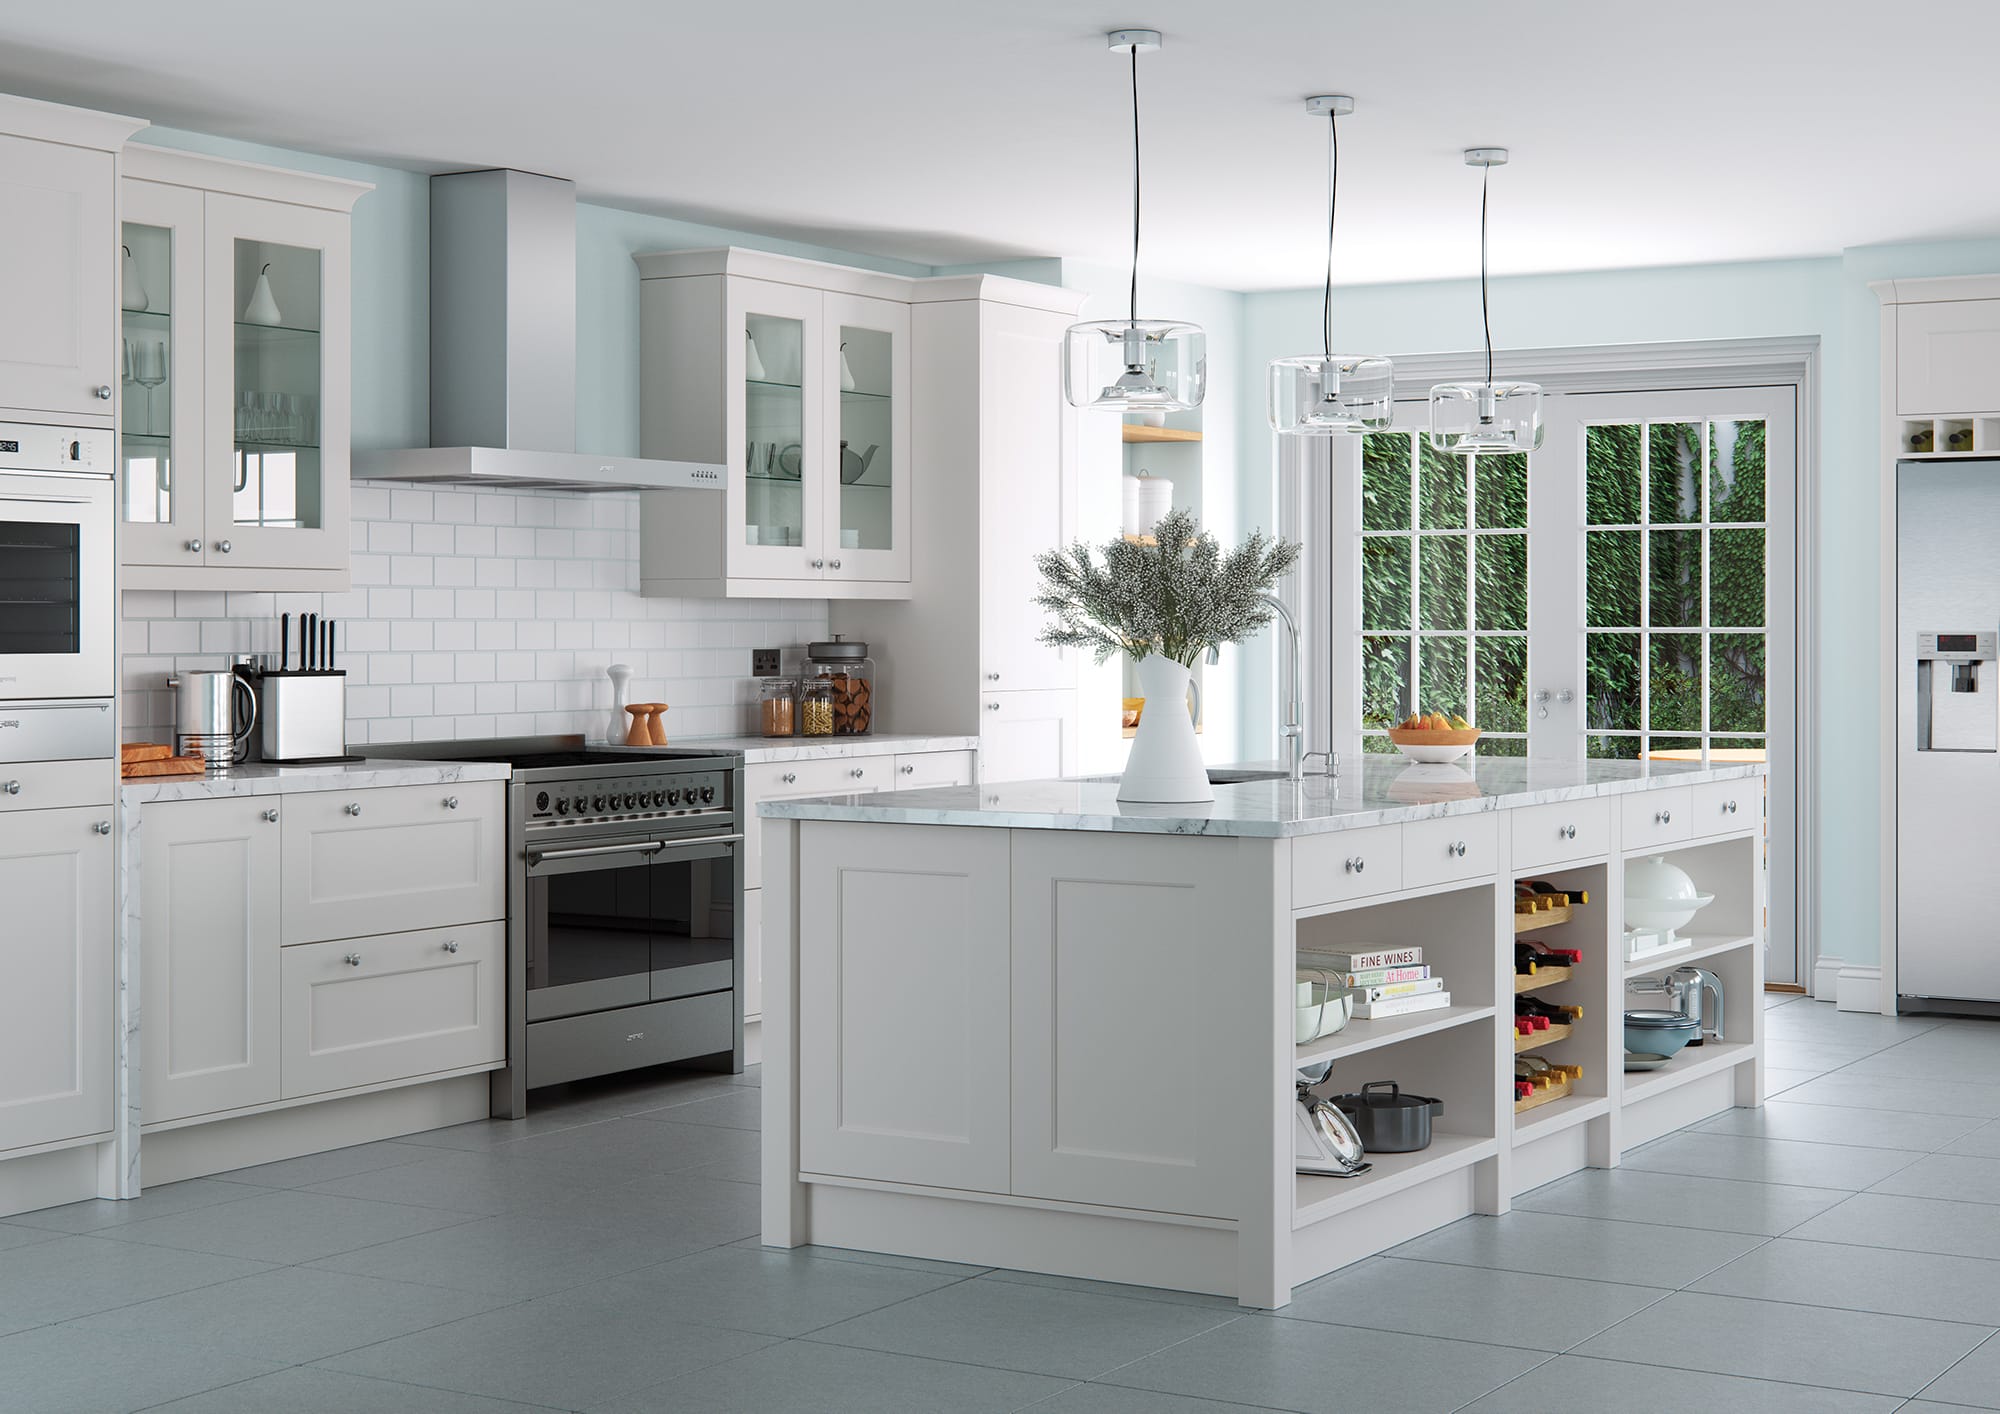 Ultimate Kitchens – Trade Kitchens Direct From Our Factory @PKBTrade